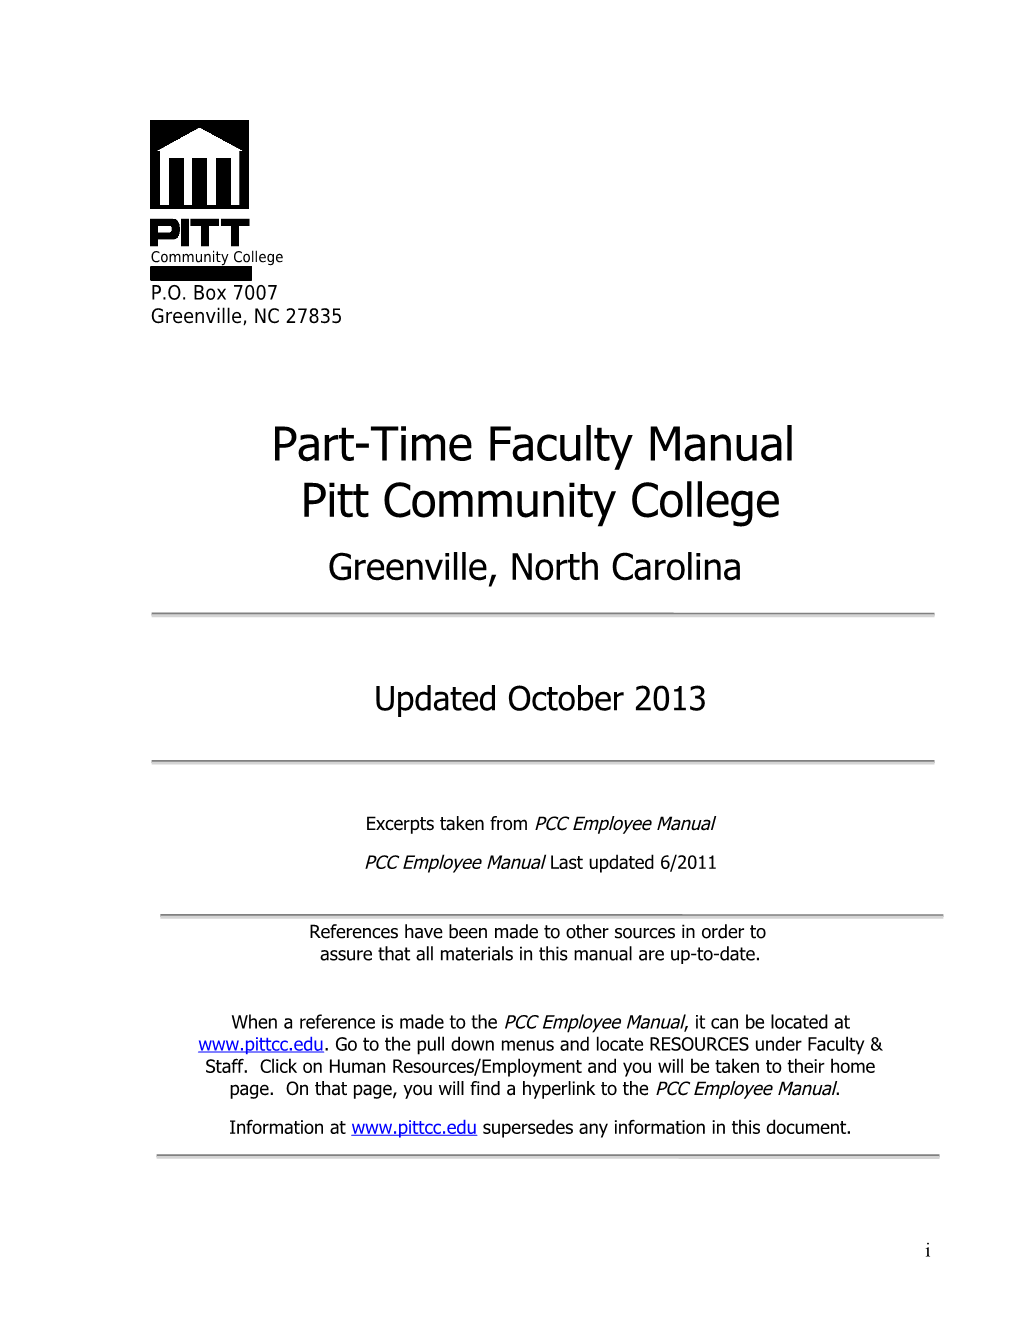 Part-Time Faculty Manual Pitt Community College